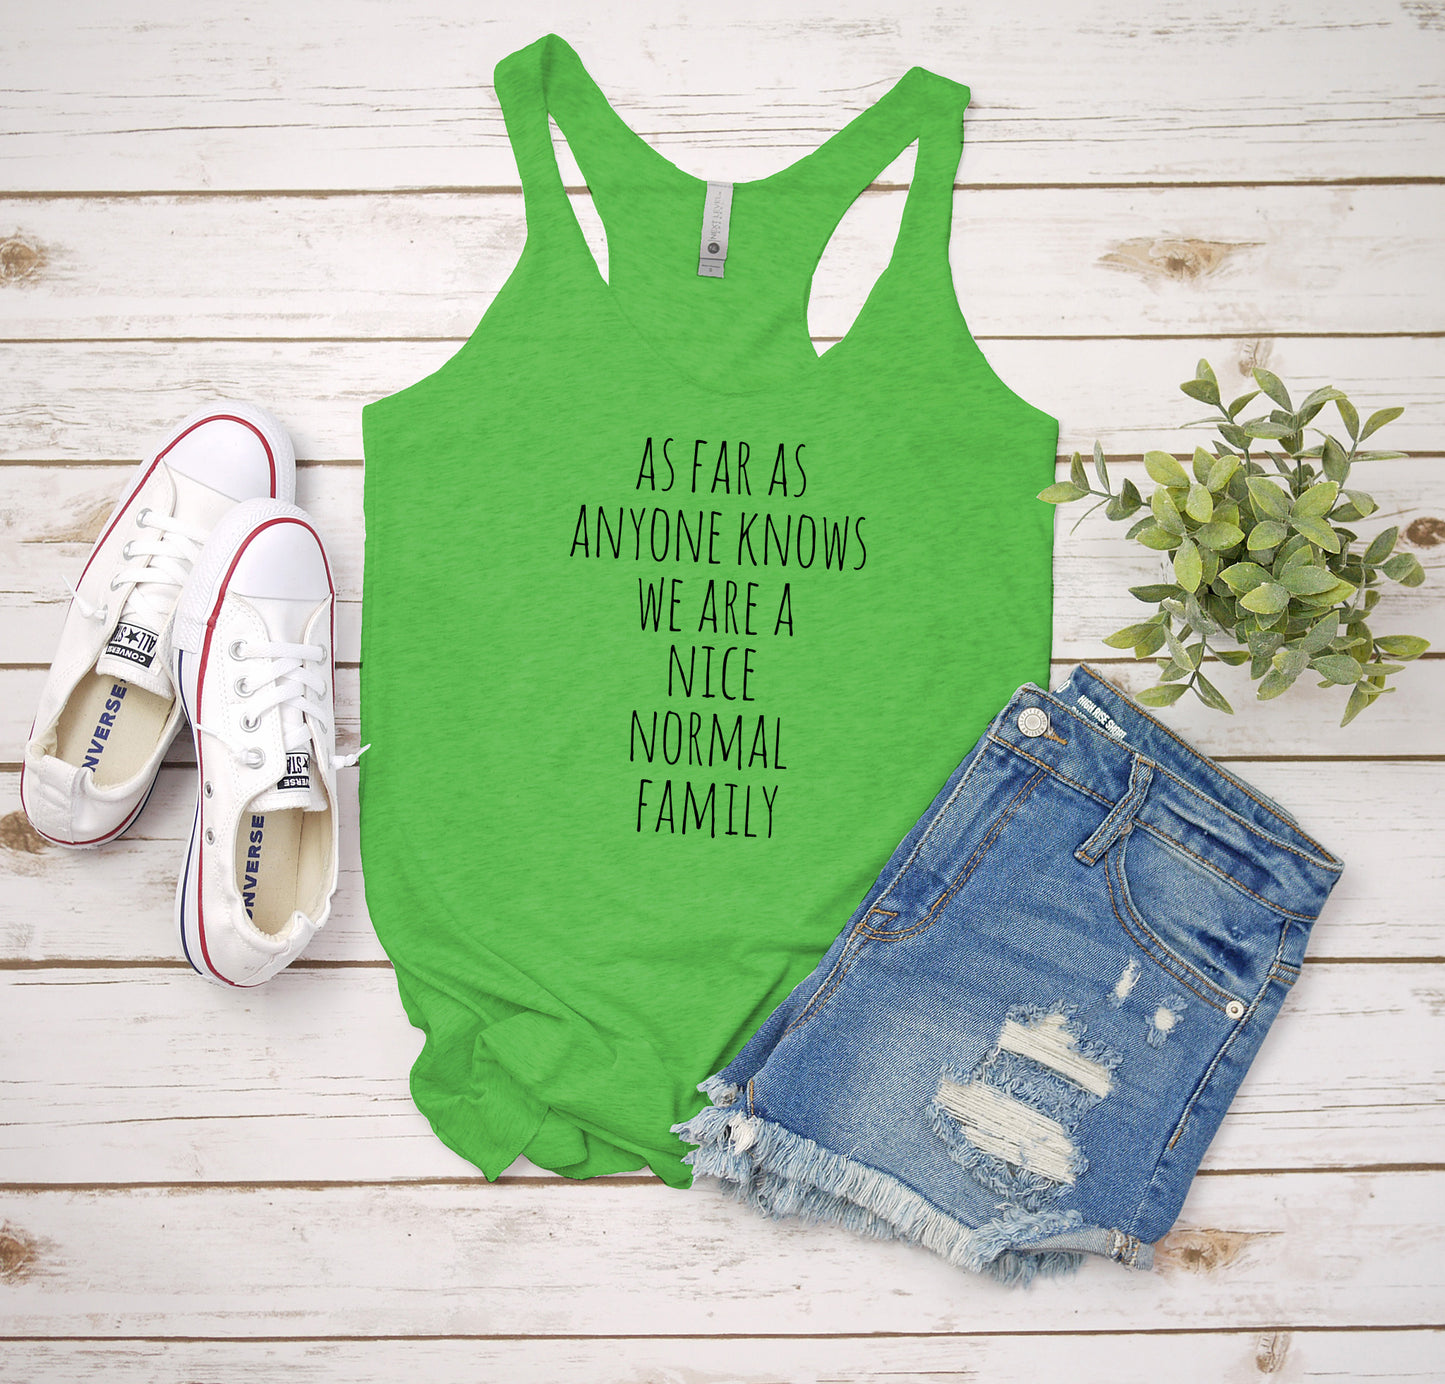 As Far As Anyone Knows We Are A Nice Normal Family - Women's Tank - Heather Gray, Tahiti, or Envy